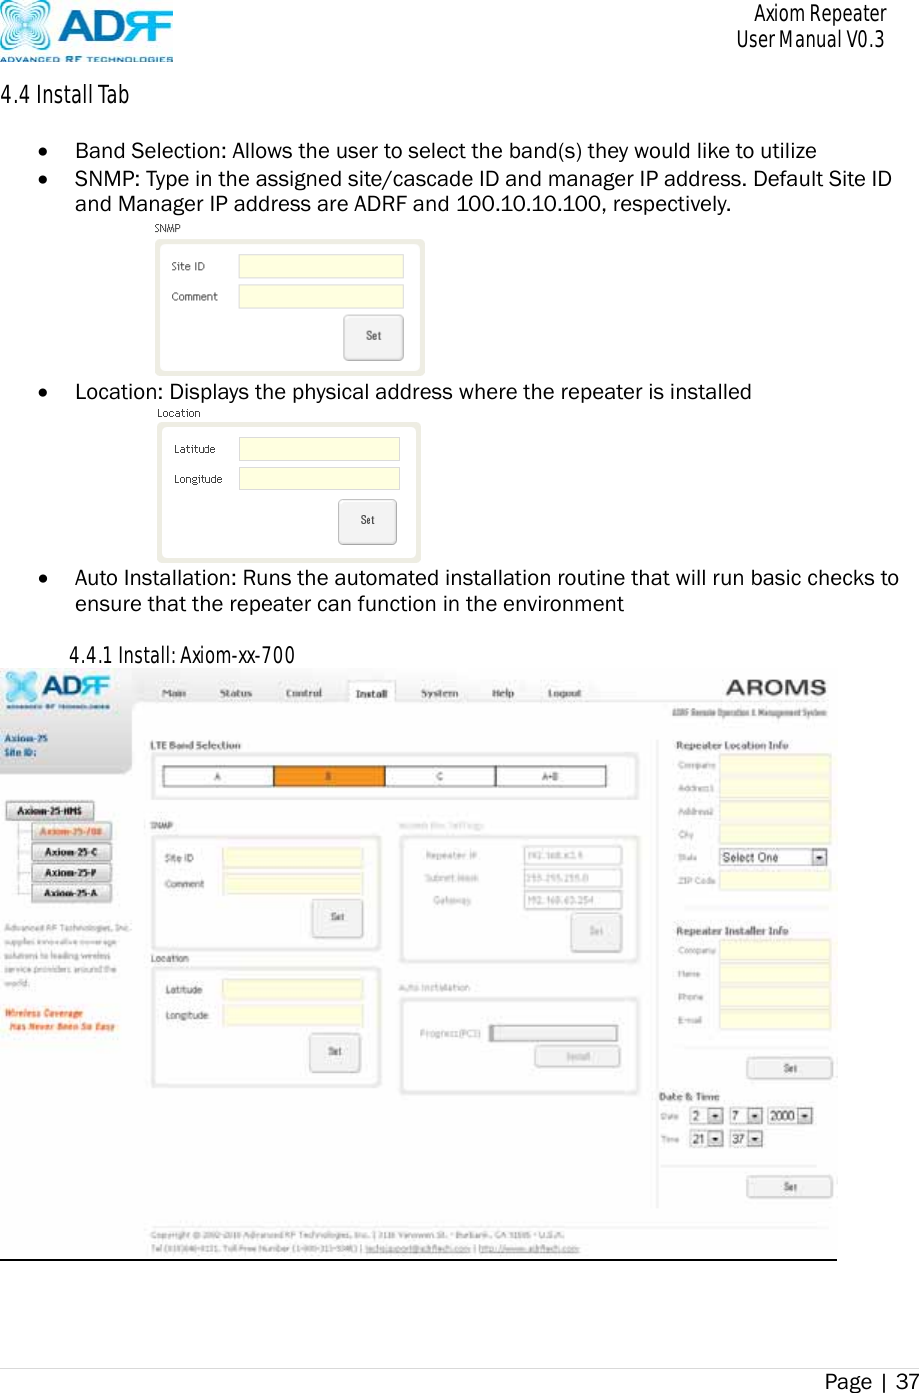       Axiom Repeater     User Manual V0.3 Page | 37    4.4 Install Tab   Band Selection: Allows the user to select the band(s) they would like to utilize  SNMP: Type in the assigned site/cascade ID and manager IP address. Default Site ID and Manager IP address are ADRF and 100.10.10.100, respectively.   Location: Displays the physical address where the repeater is installed   Auto Installation: Runs the automated installation routine that will run basic checks to ensure that the repeater can function in the environment  4.4.1 Install: Axiom-xx-700  